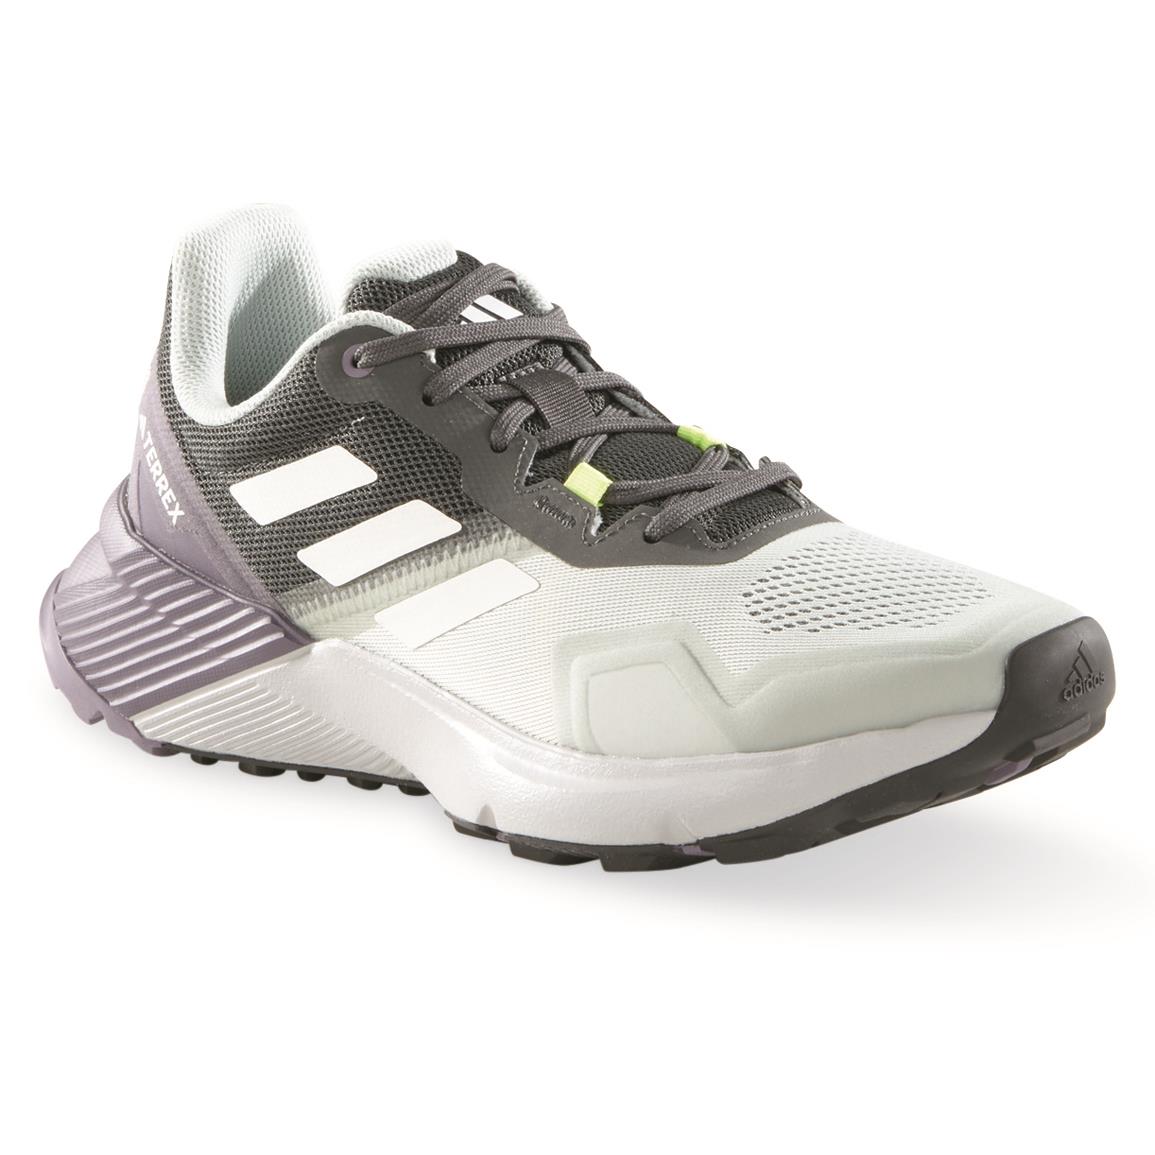 Adidas Women's Soulstride Trail Running Shoes, Dgh Solid Grey/crystal White/wonder Silv